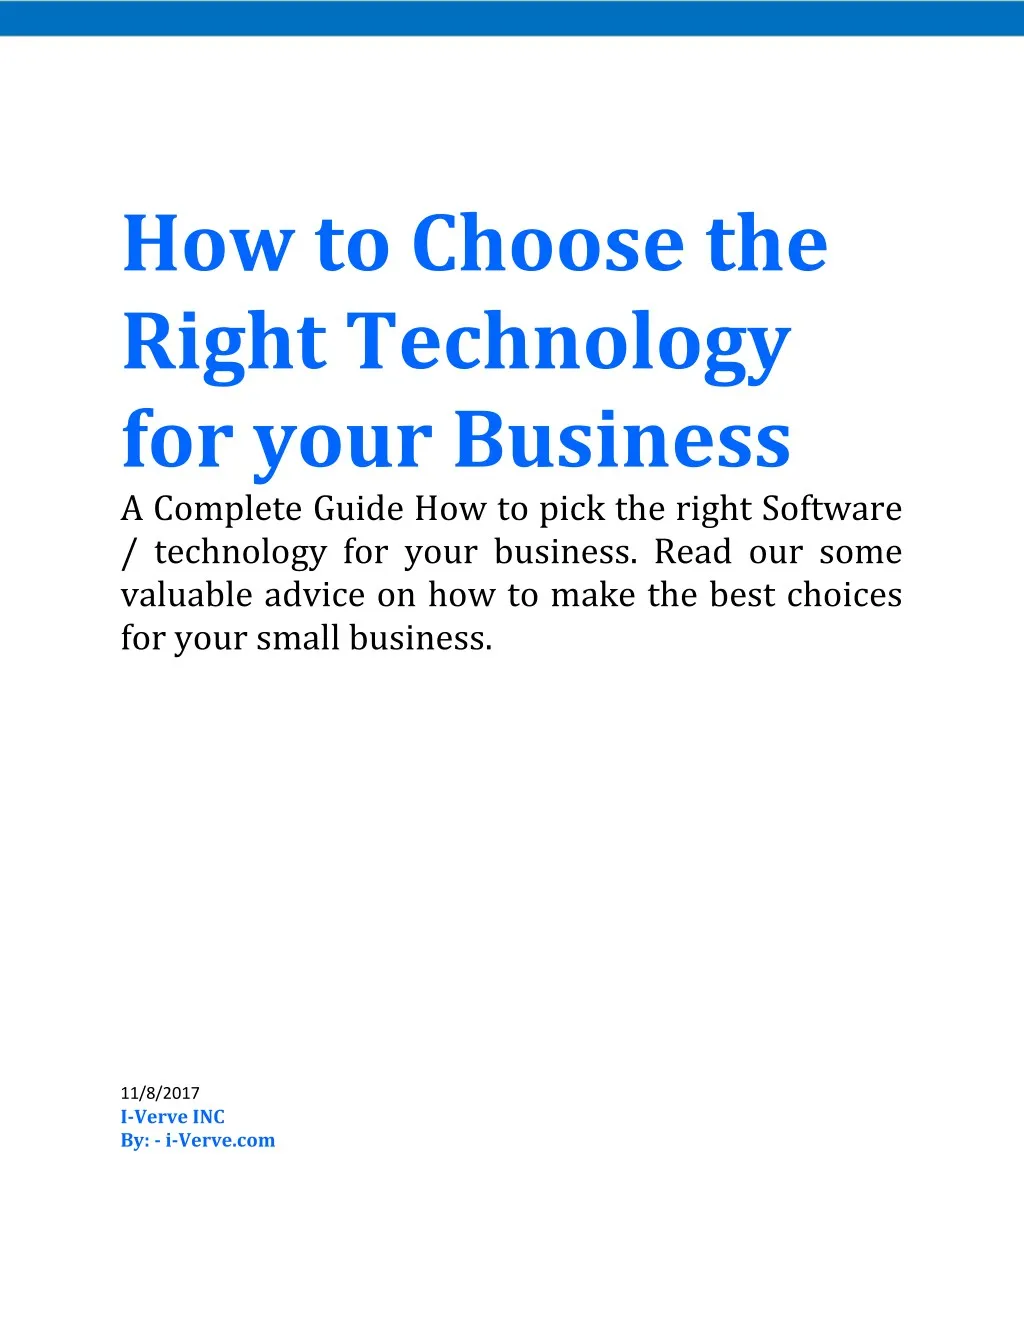 how to choose the right technology for your